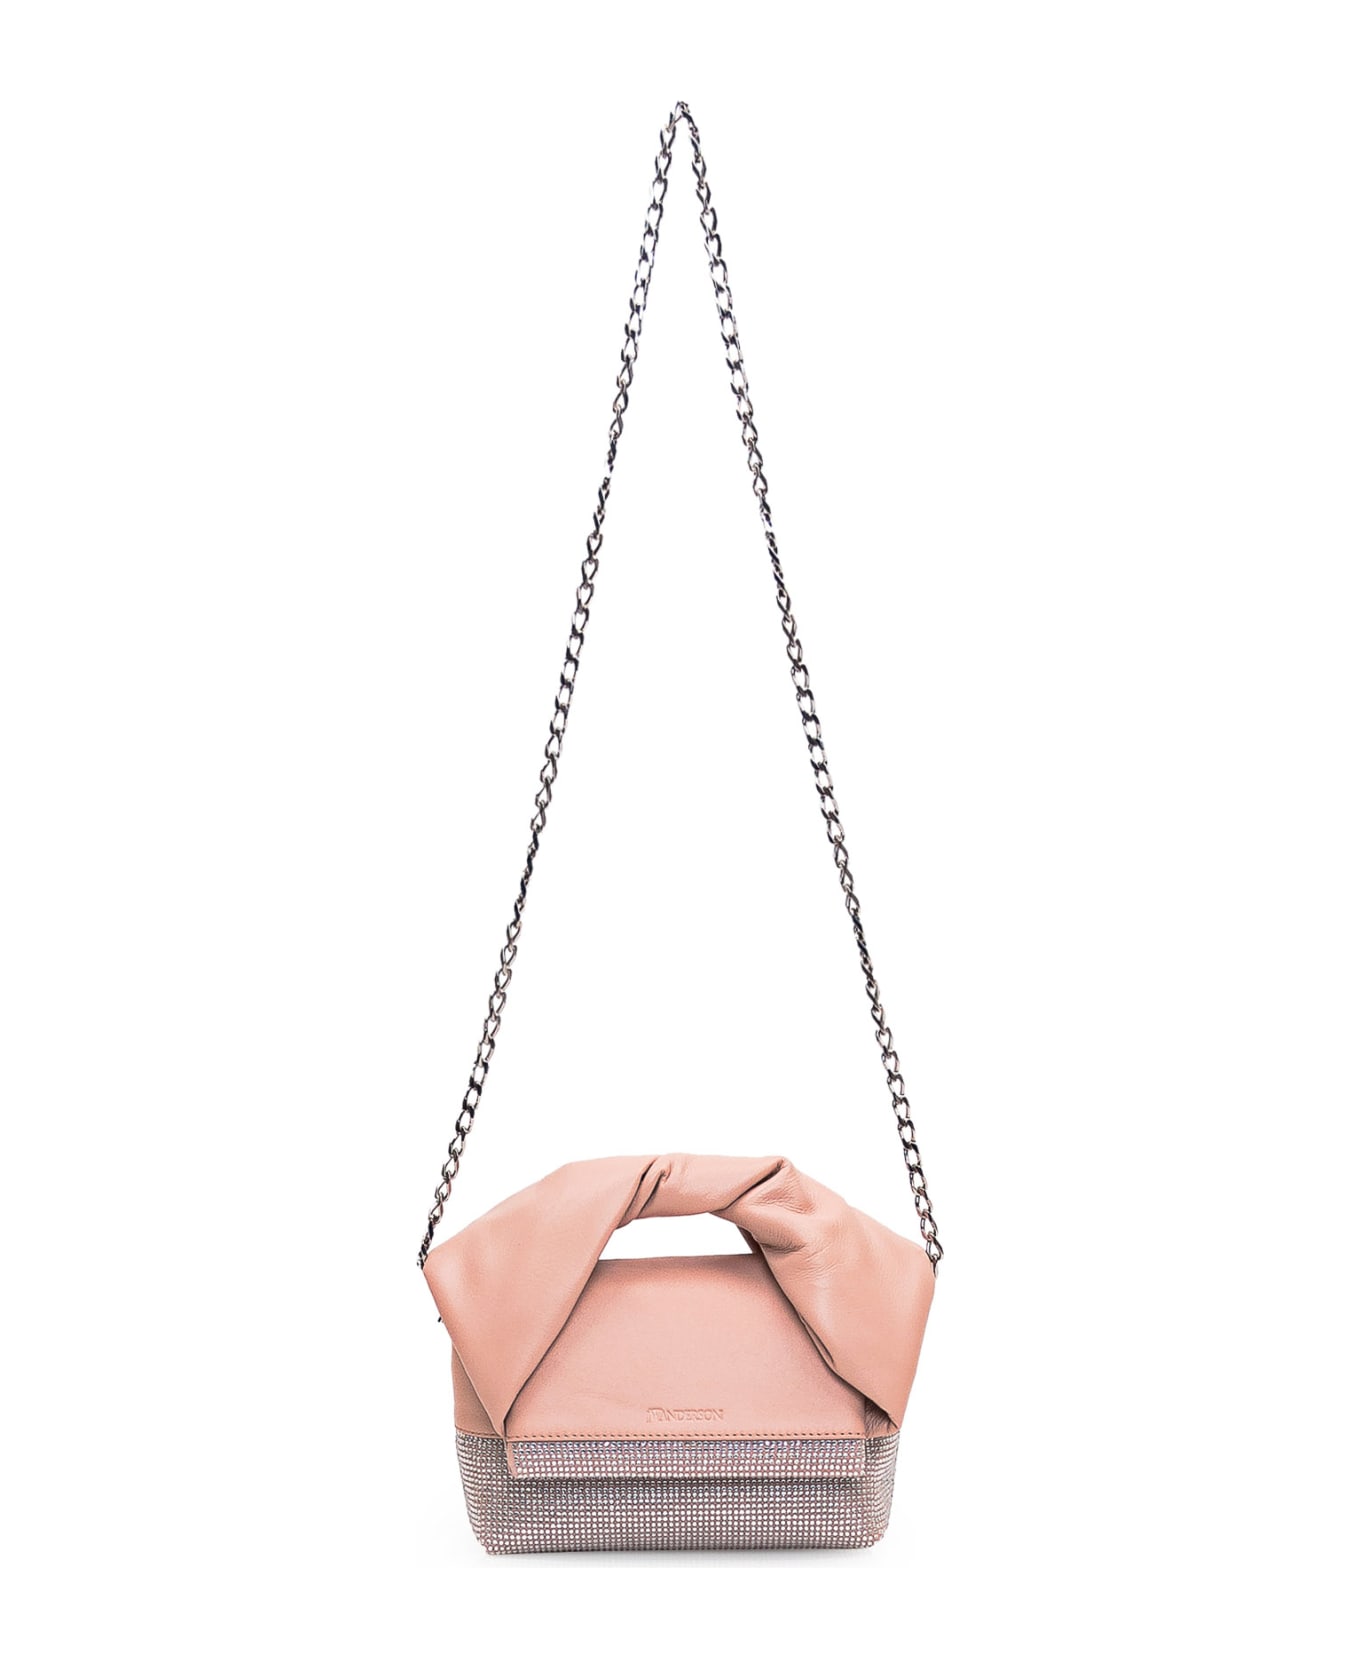 J.W. Anderson Small Twister Bag - DUSTY ROSE